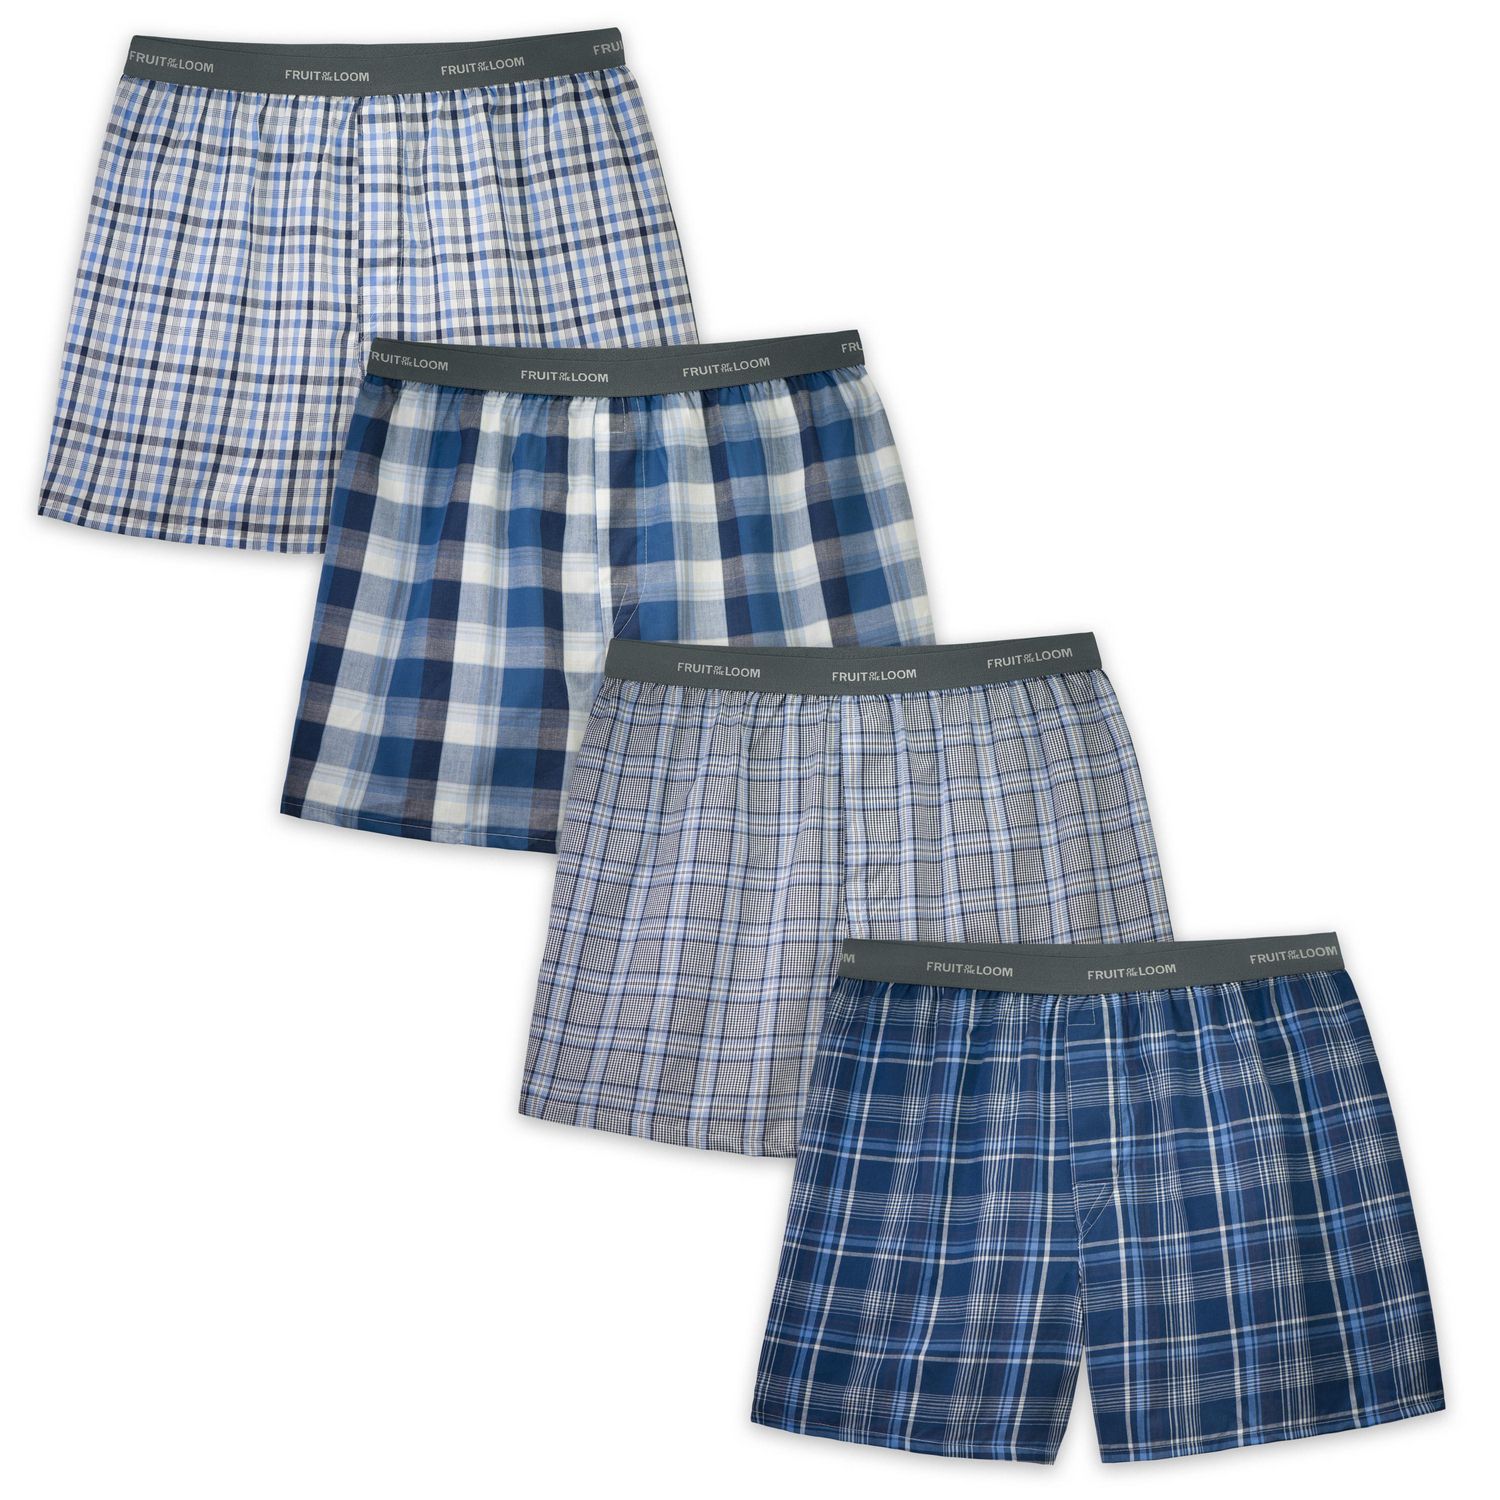 Up To 58% Off on Fruit of the Loom Men's Boxer